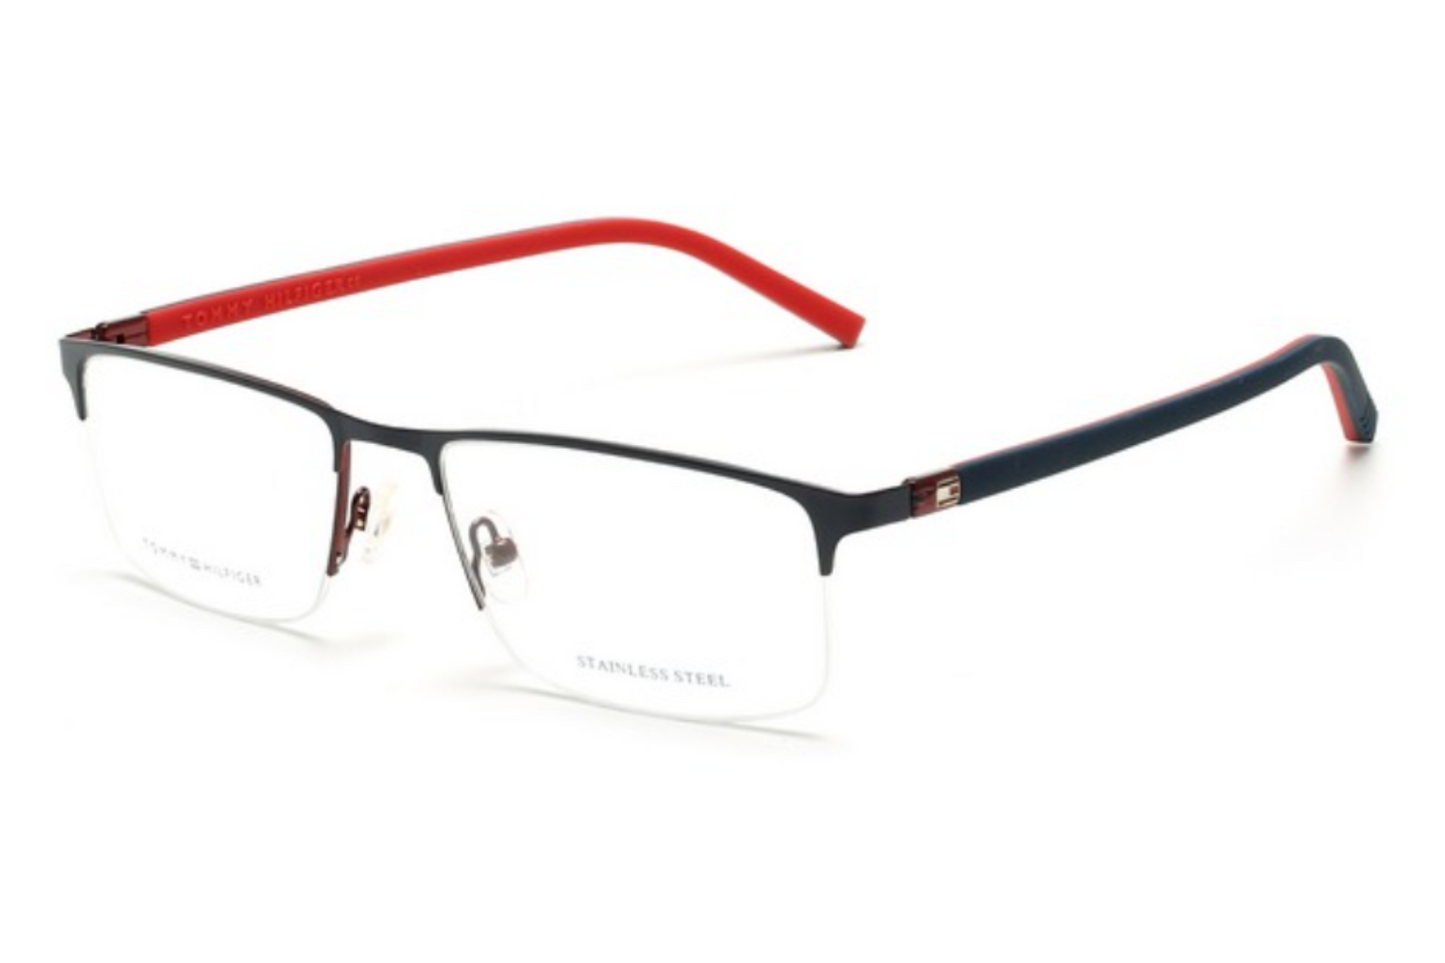 Tommy Hilfiger Frame TH6222 NEW ARRIVAL